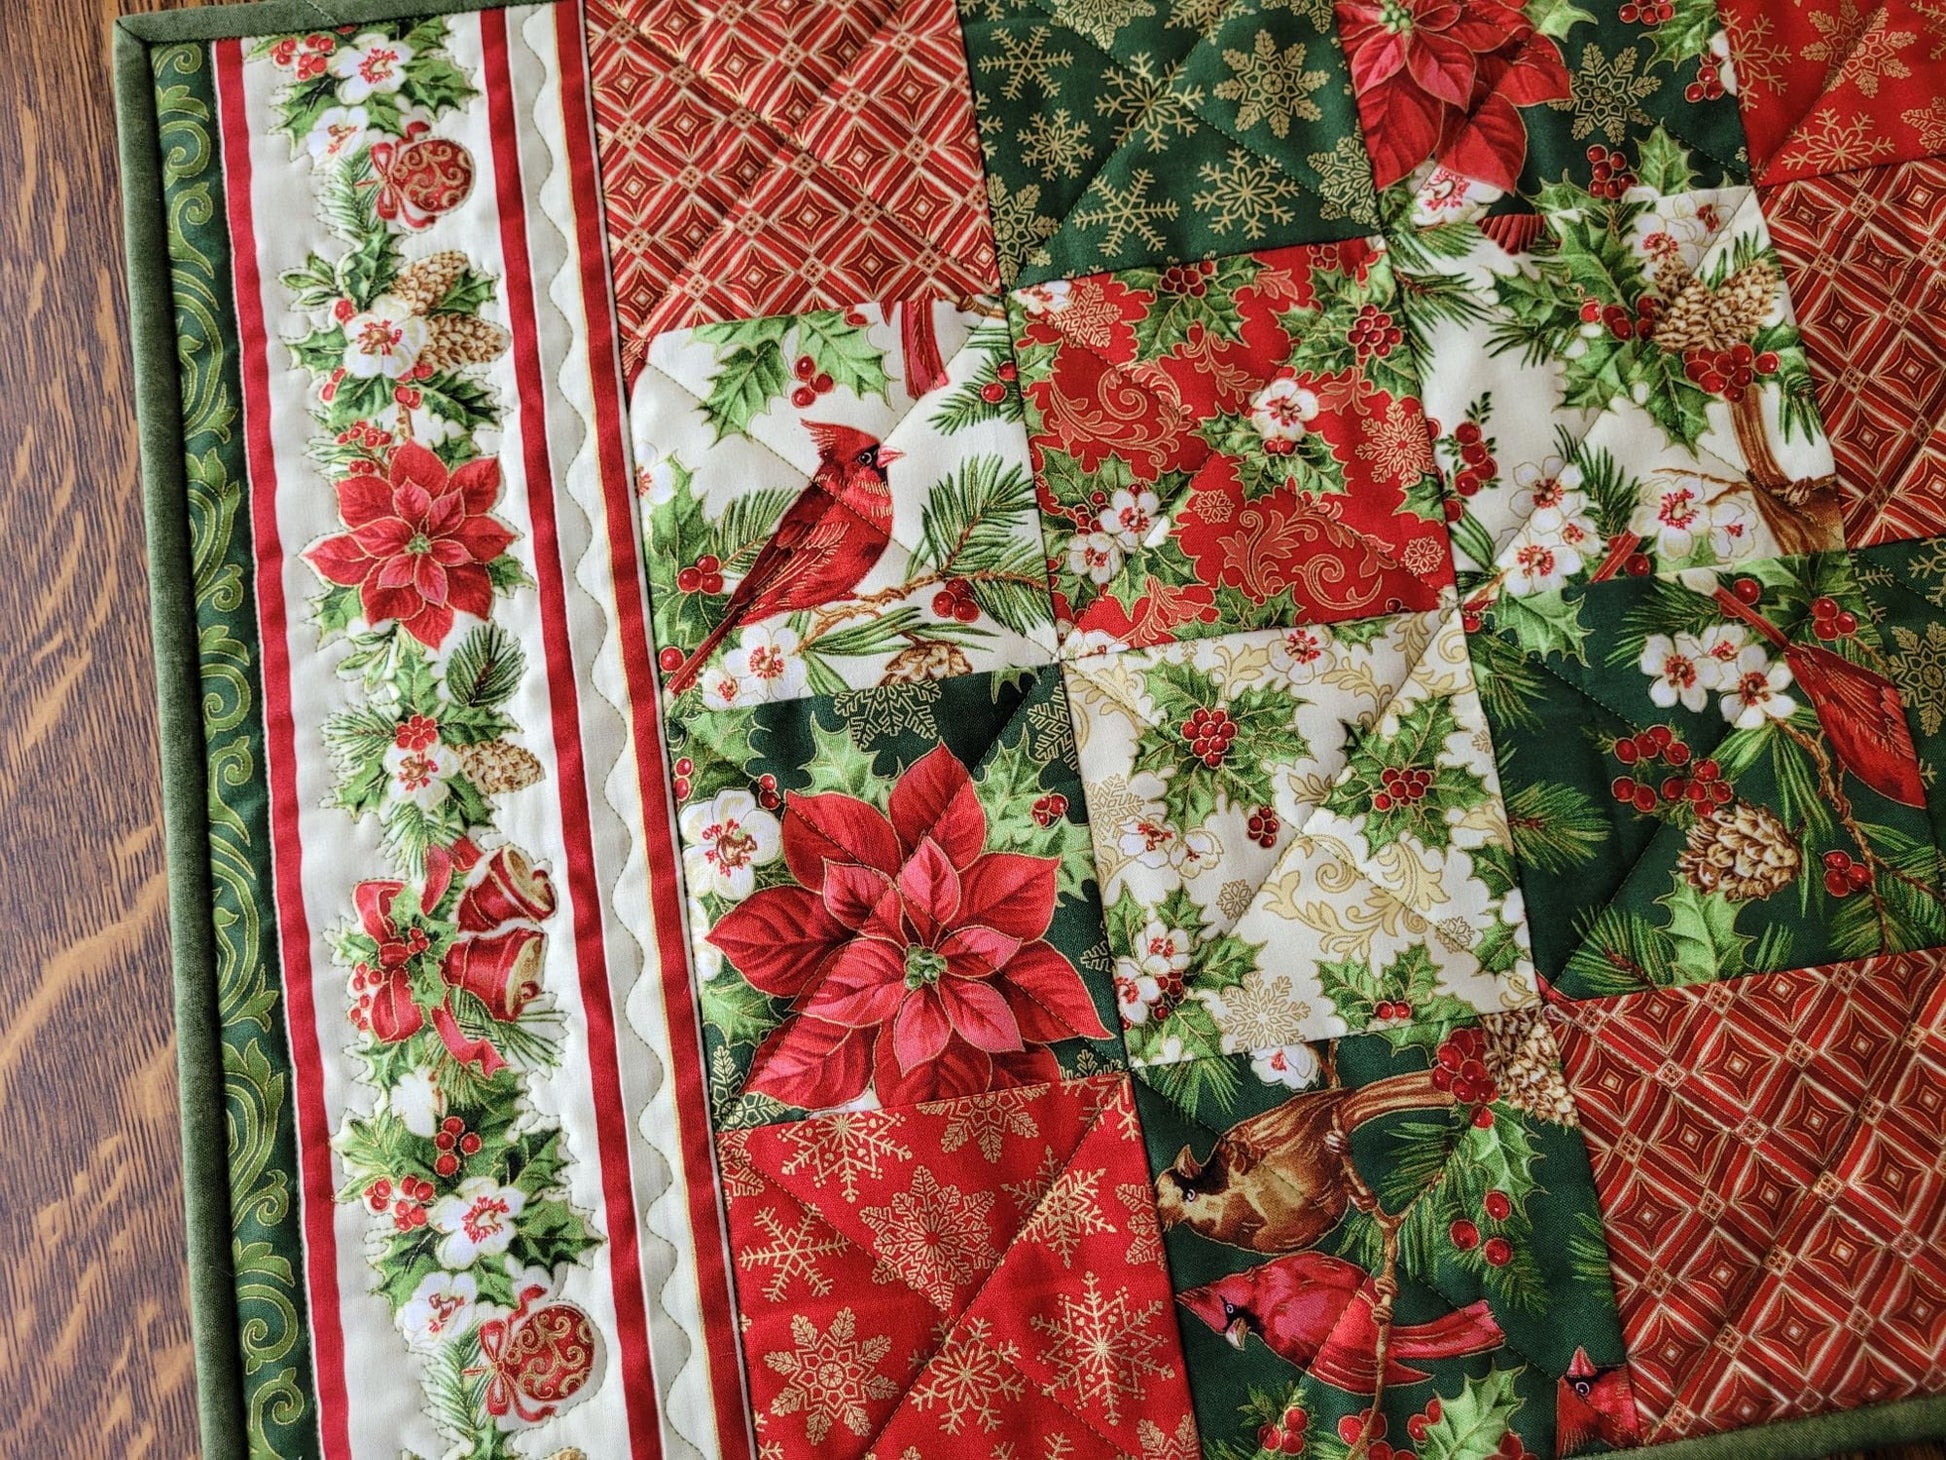 poinsettia table runner with cardinals